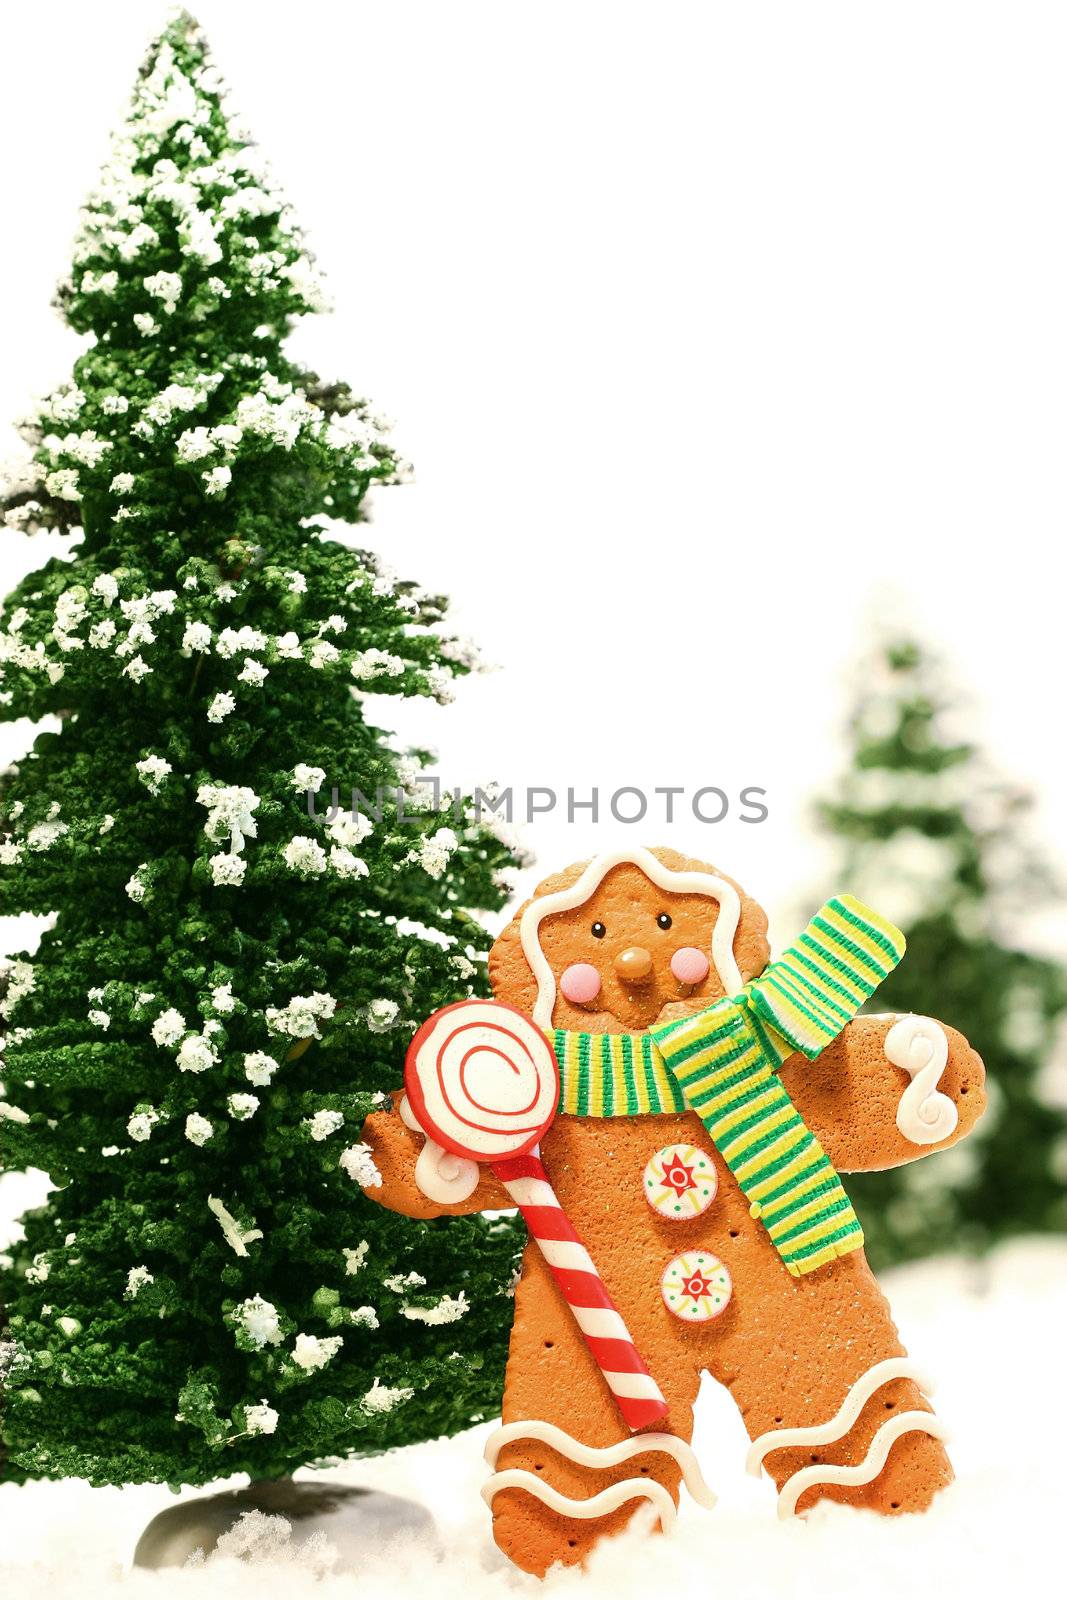 Little gingerbread man with green trees against white background